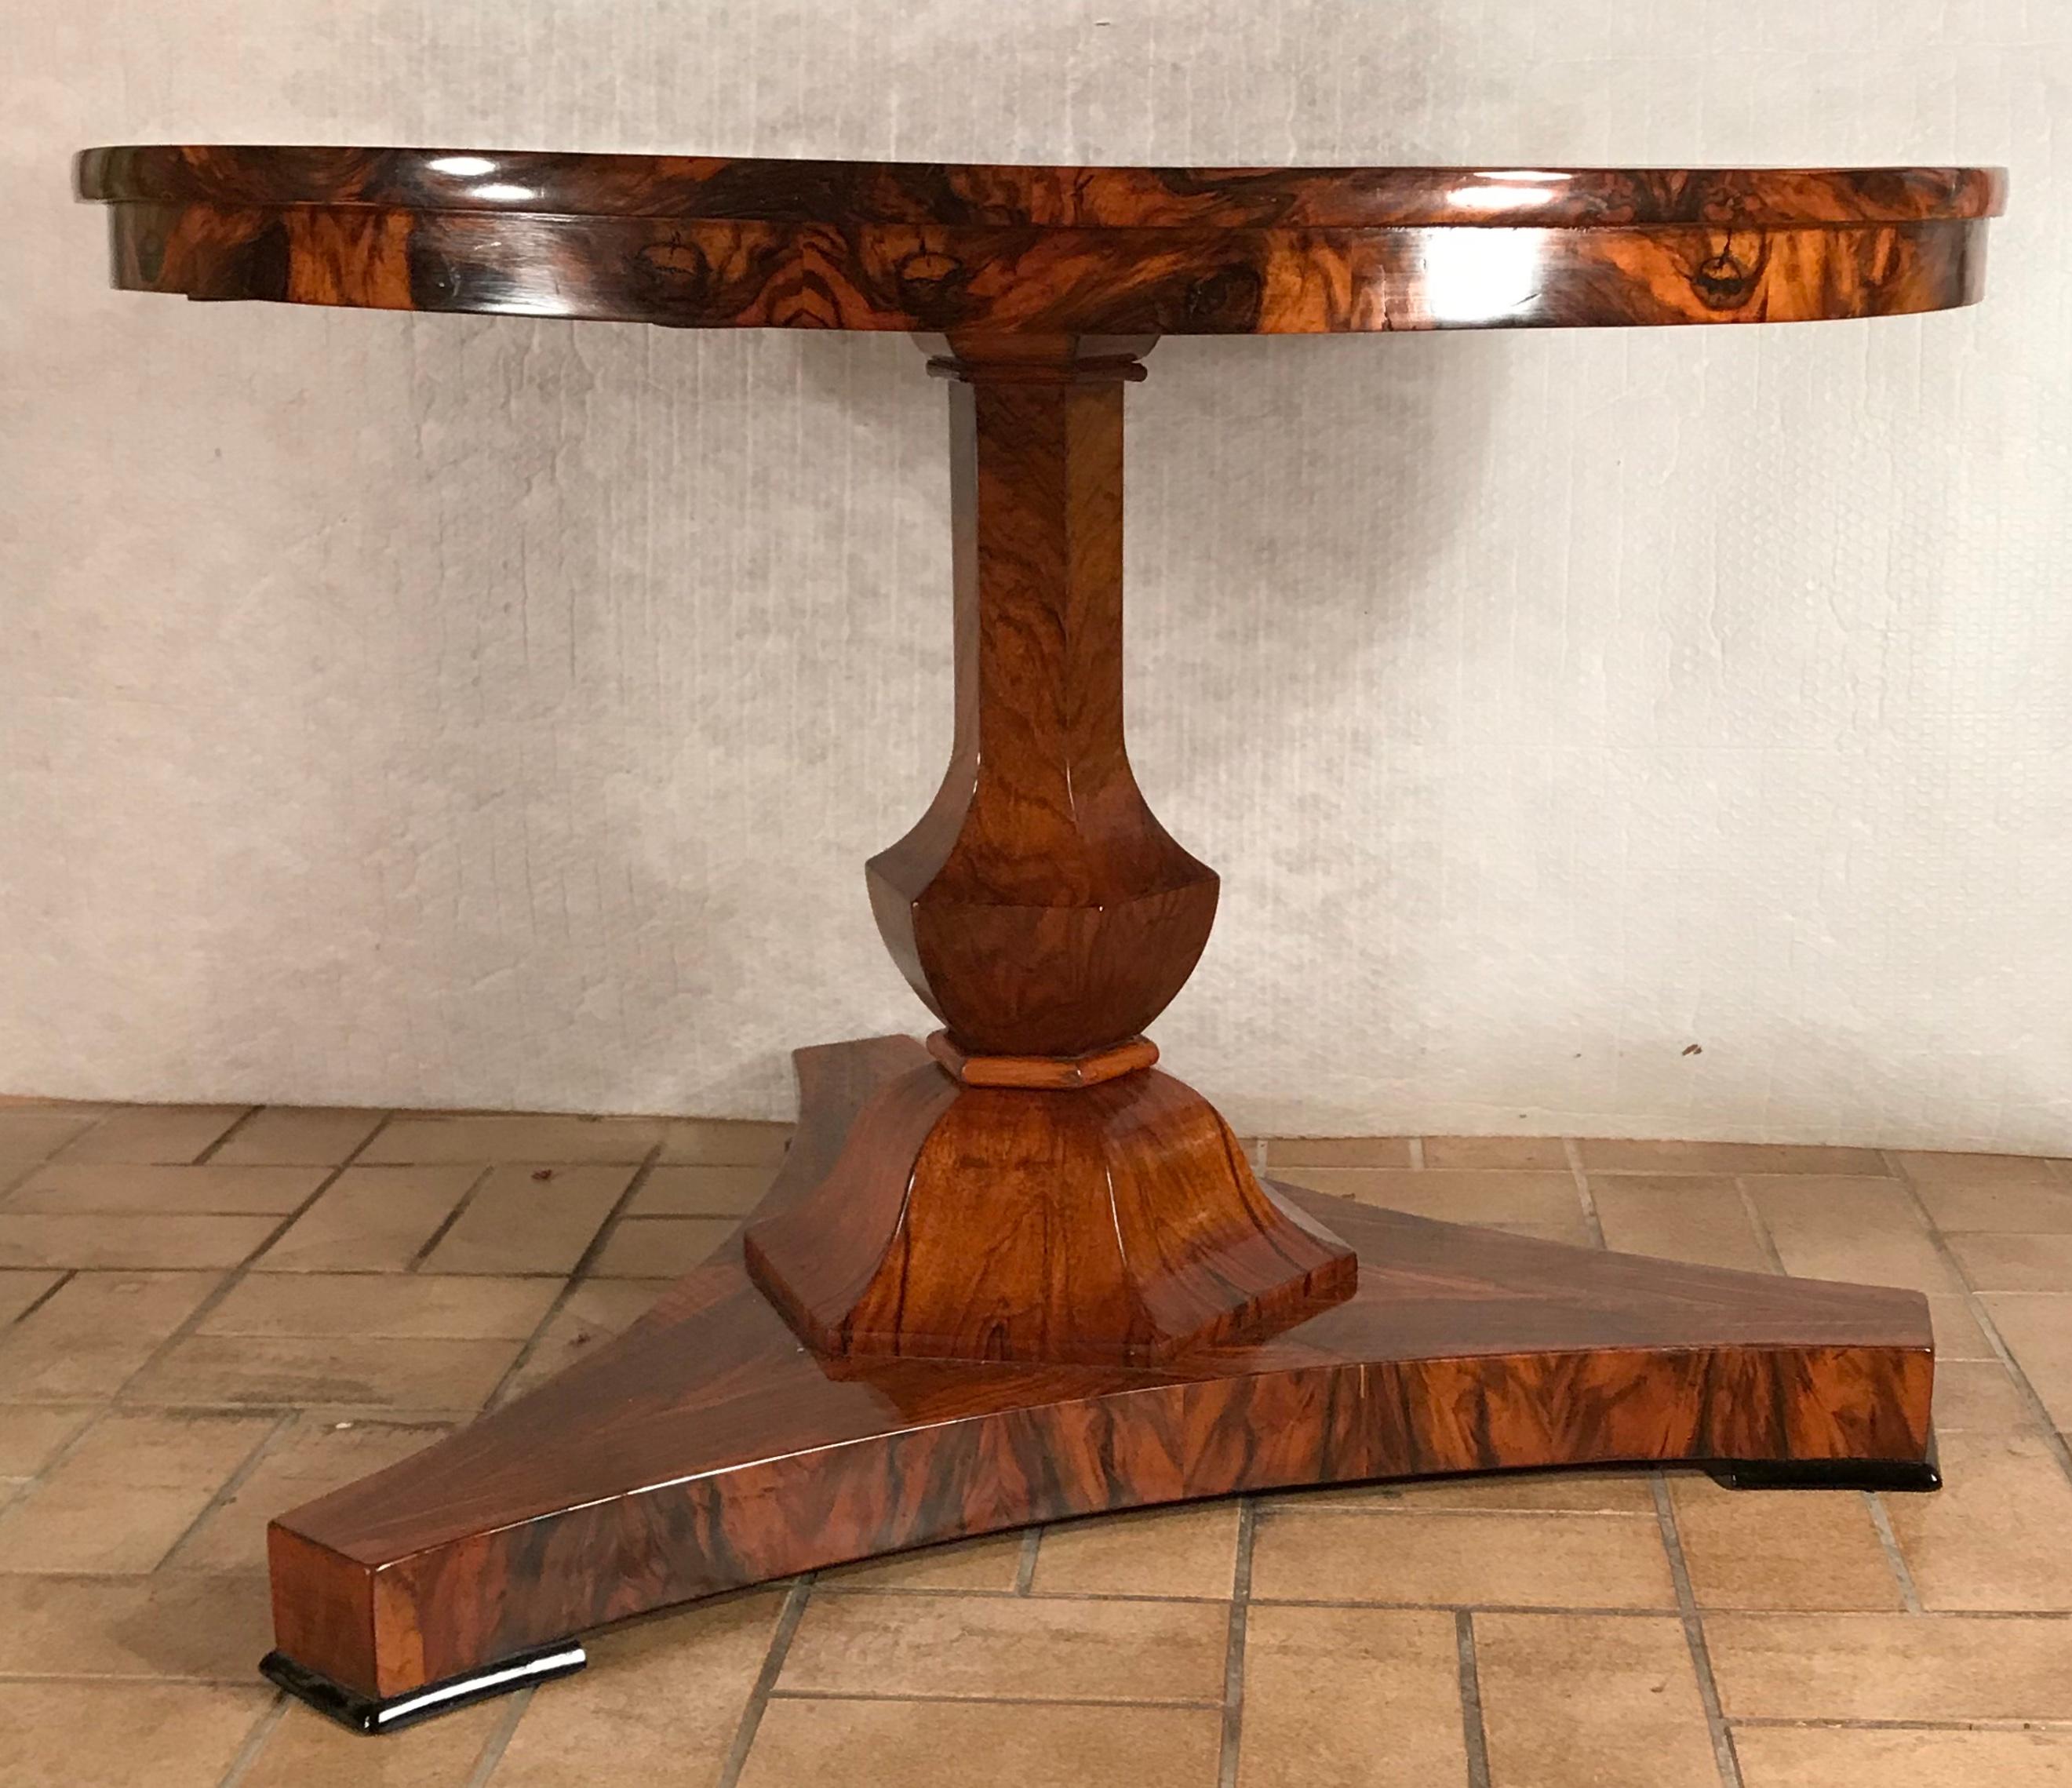 Biedermeier table, South German, 1820.
This unique original Biedermeier table stands out for its gorgeous walnut veneer on the top. The veneer grain pattern is very unusual.
The exquisite walnut veneer also decorates the vase shaped foot and the